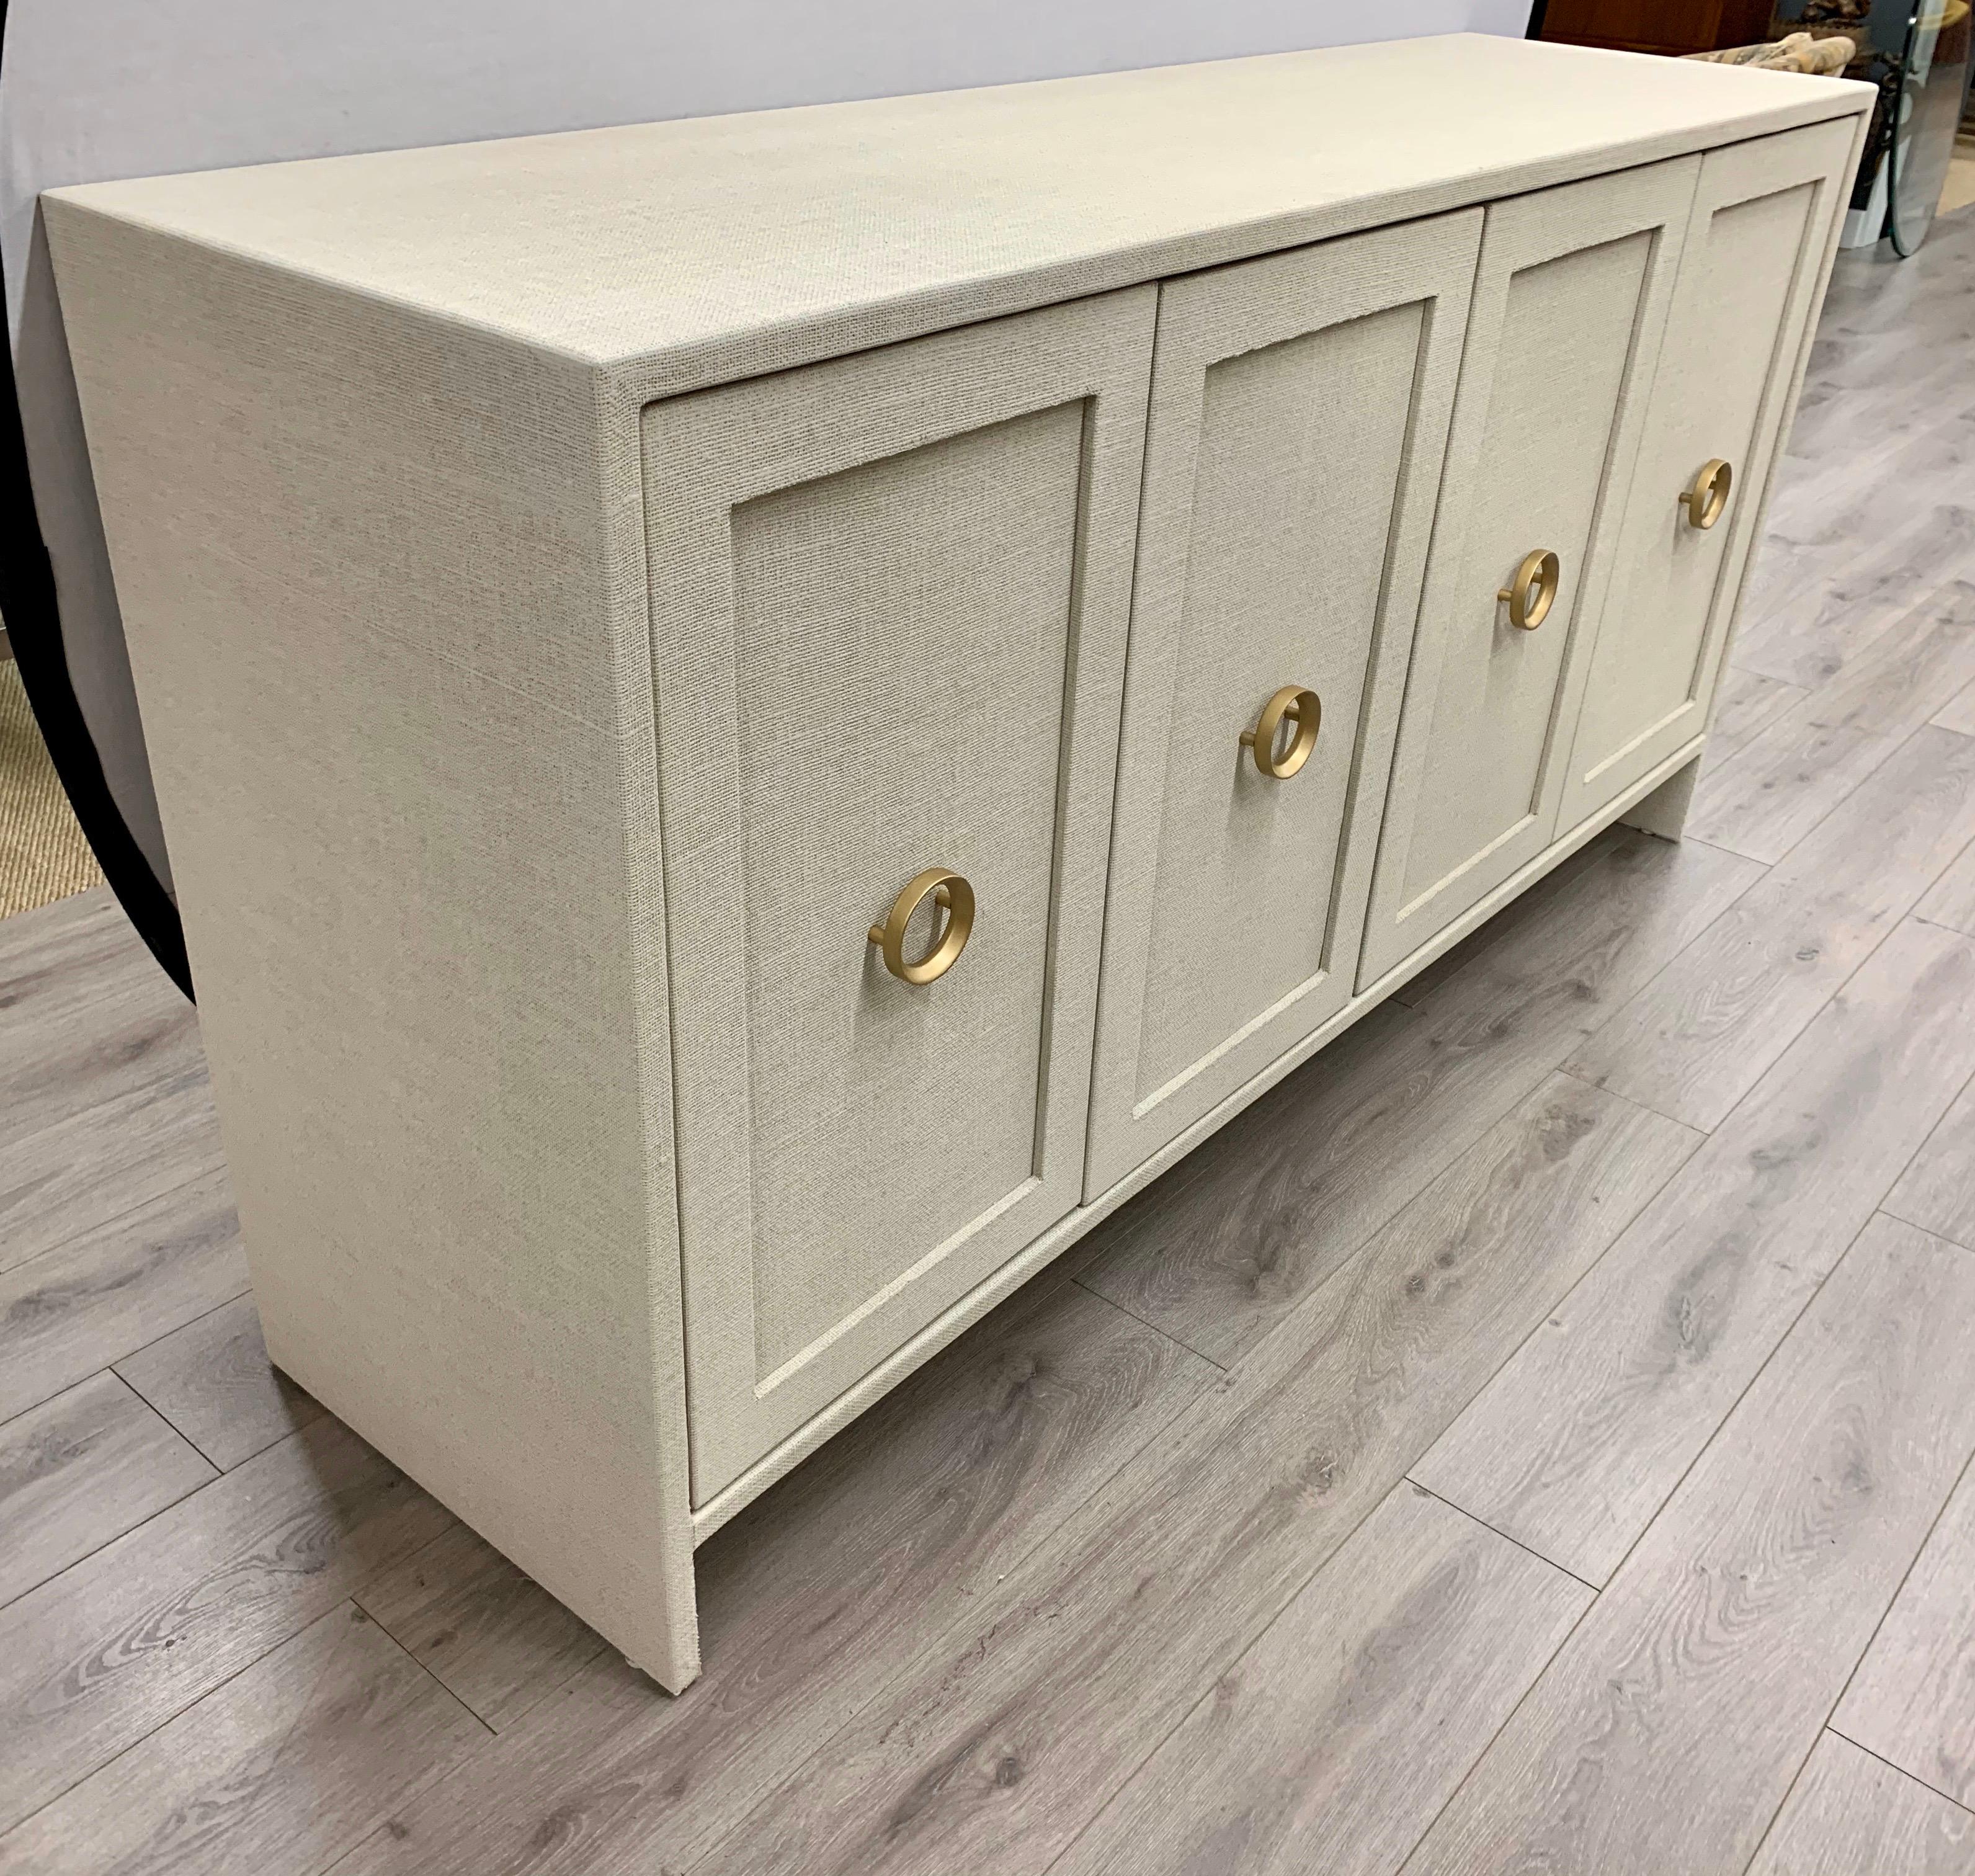 Sleek, simple lines give this credenza a Mid-Century Modern feel and is wrapped by hand in fine linen then given a multi-layered paint glaze. It has two pairs of double doors that open to shelving. Round brass handles give it a decorative flair. A